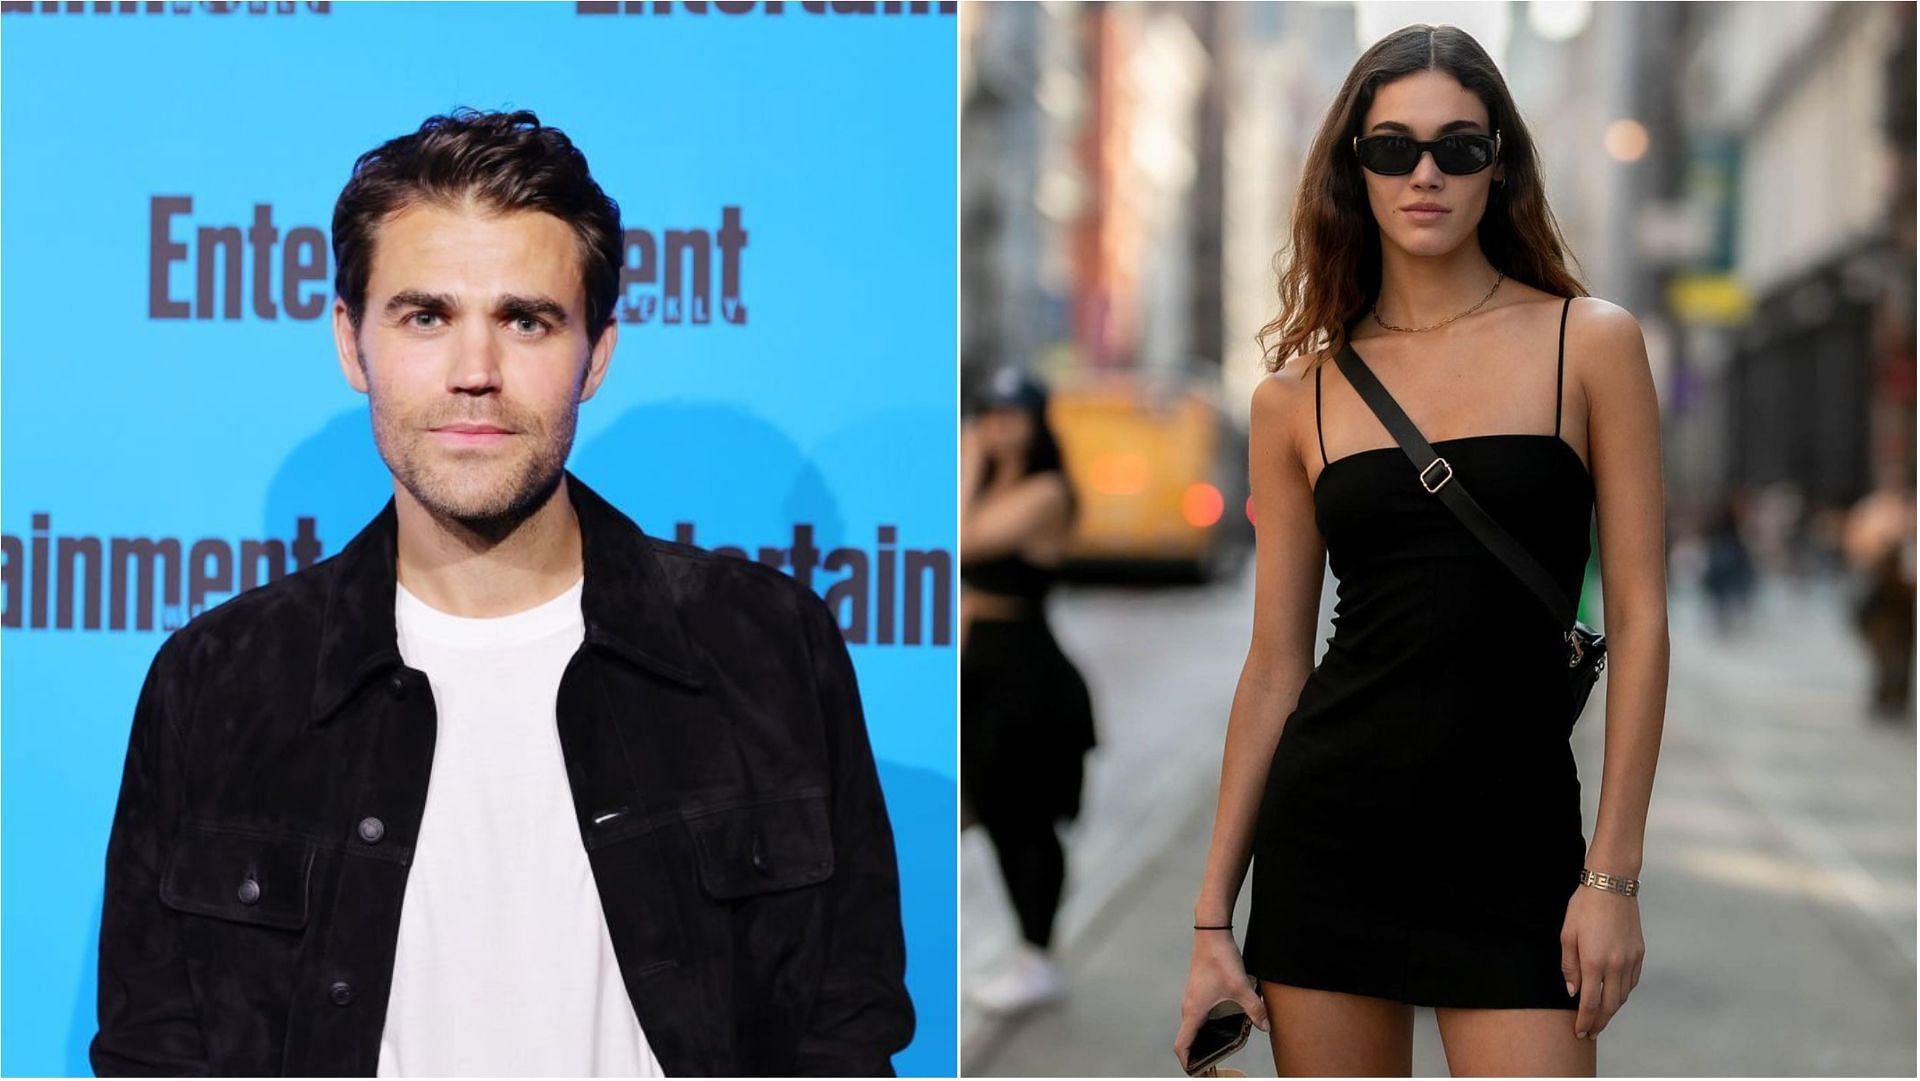 Paul Wesley and Natalie Kuckenburg were spotted kissing during a romantic trip (Images via Matt Winkelmeyer/Getty Images and nataliekuckenburg/Instagram)